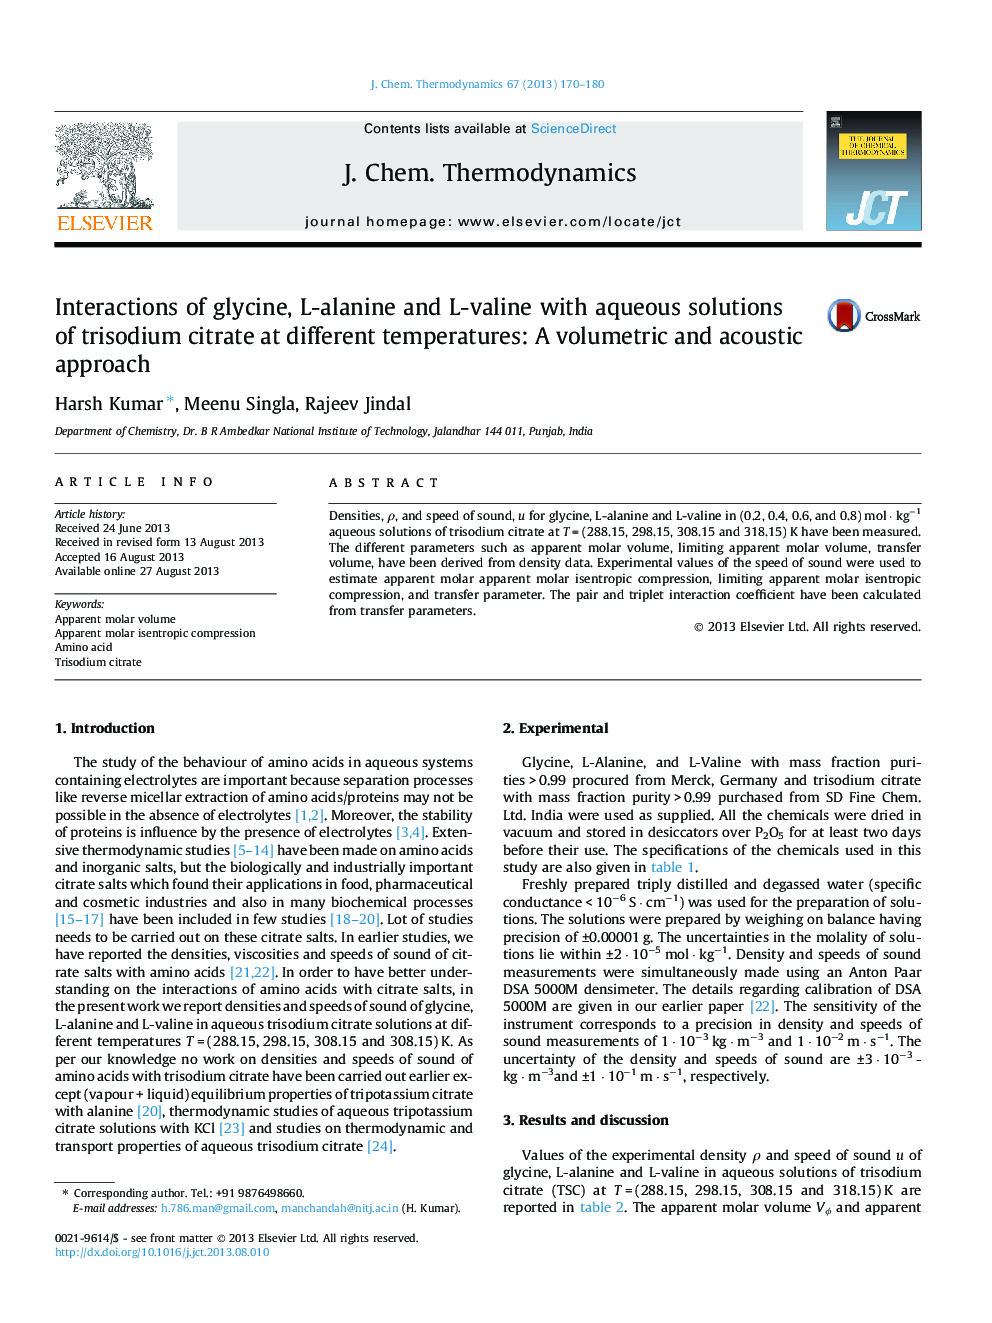 Interactions of glycine, L-alanine and L-valine with aqueous solutions of trisodium citrate at different temperatures: A volumetric and acoustic approach